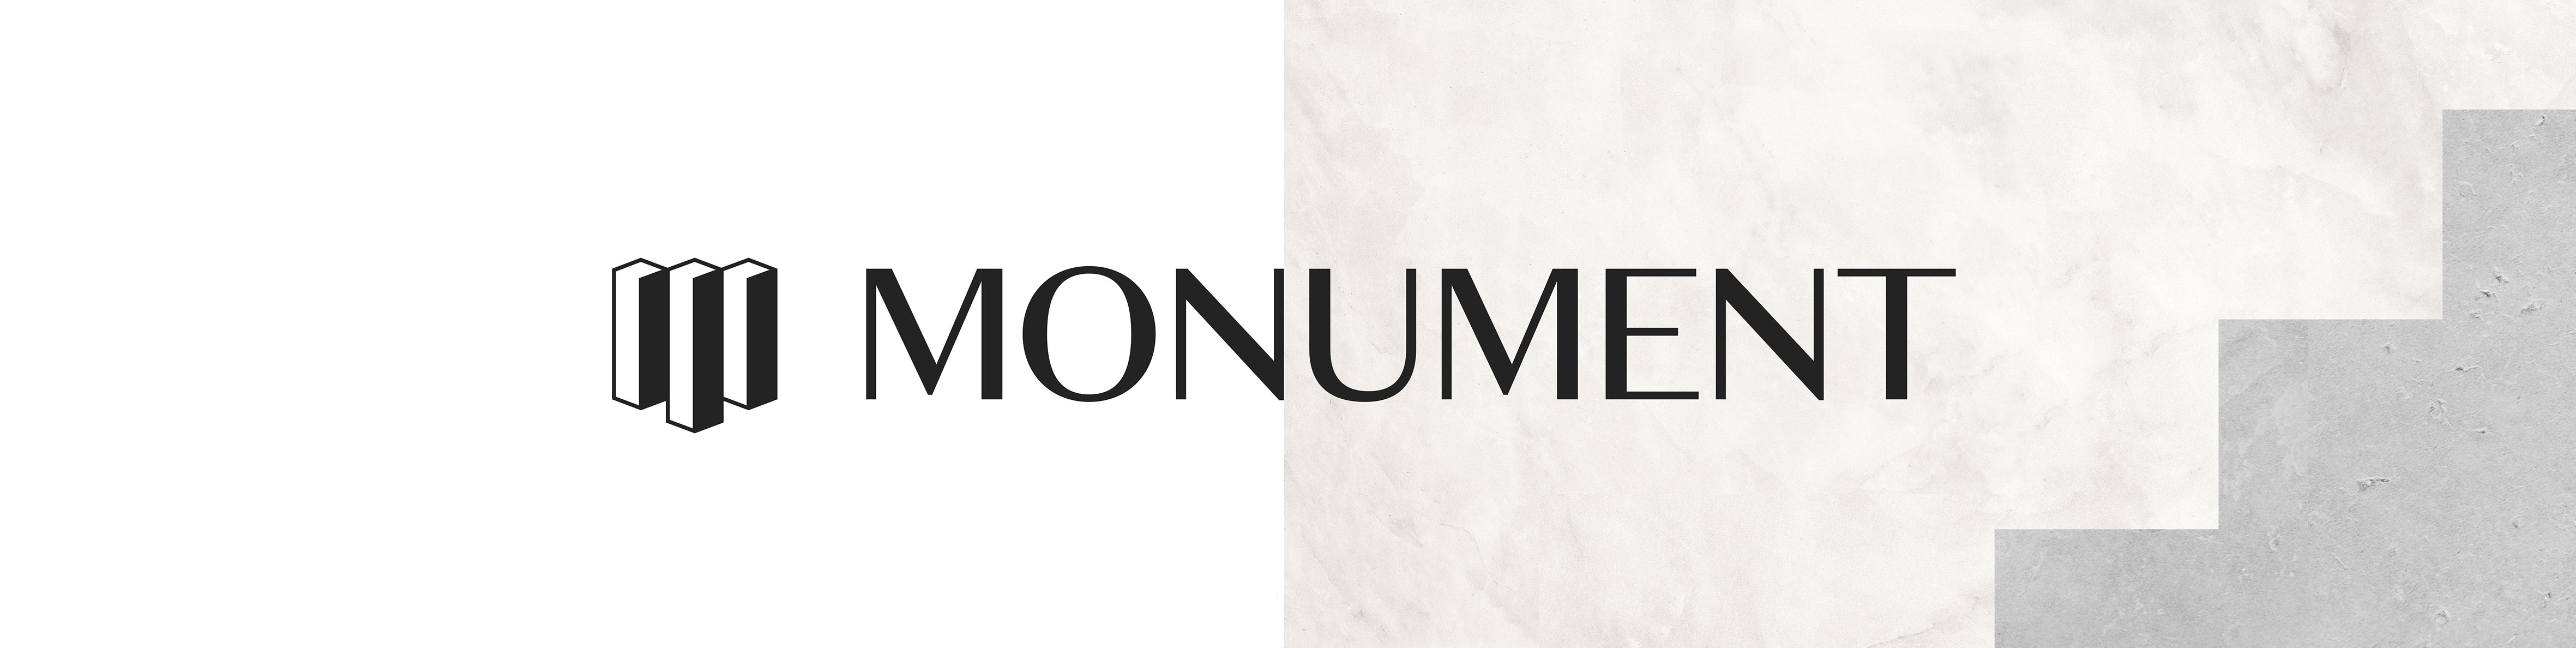 Monument Bank Raises Over £28 Million as it Successfully Completes Series A Funding Round